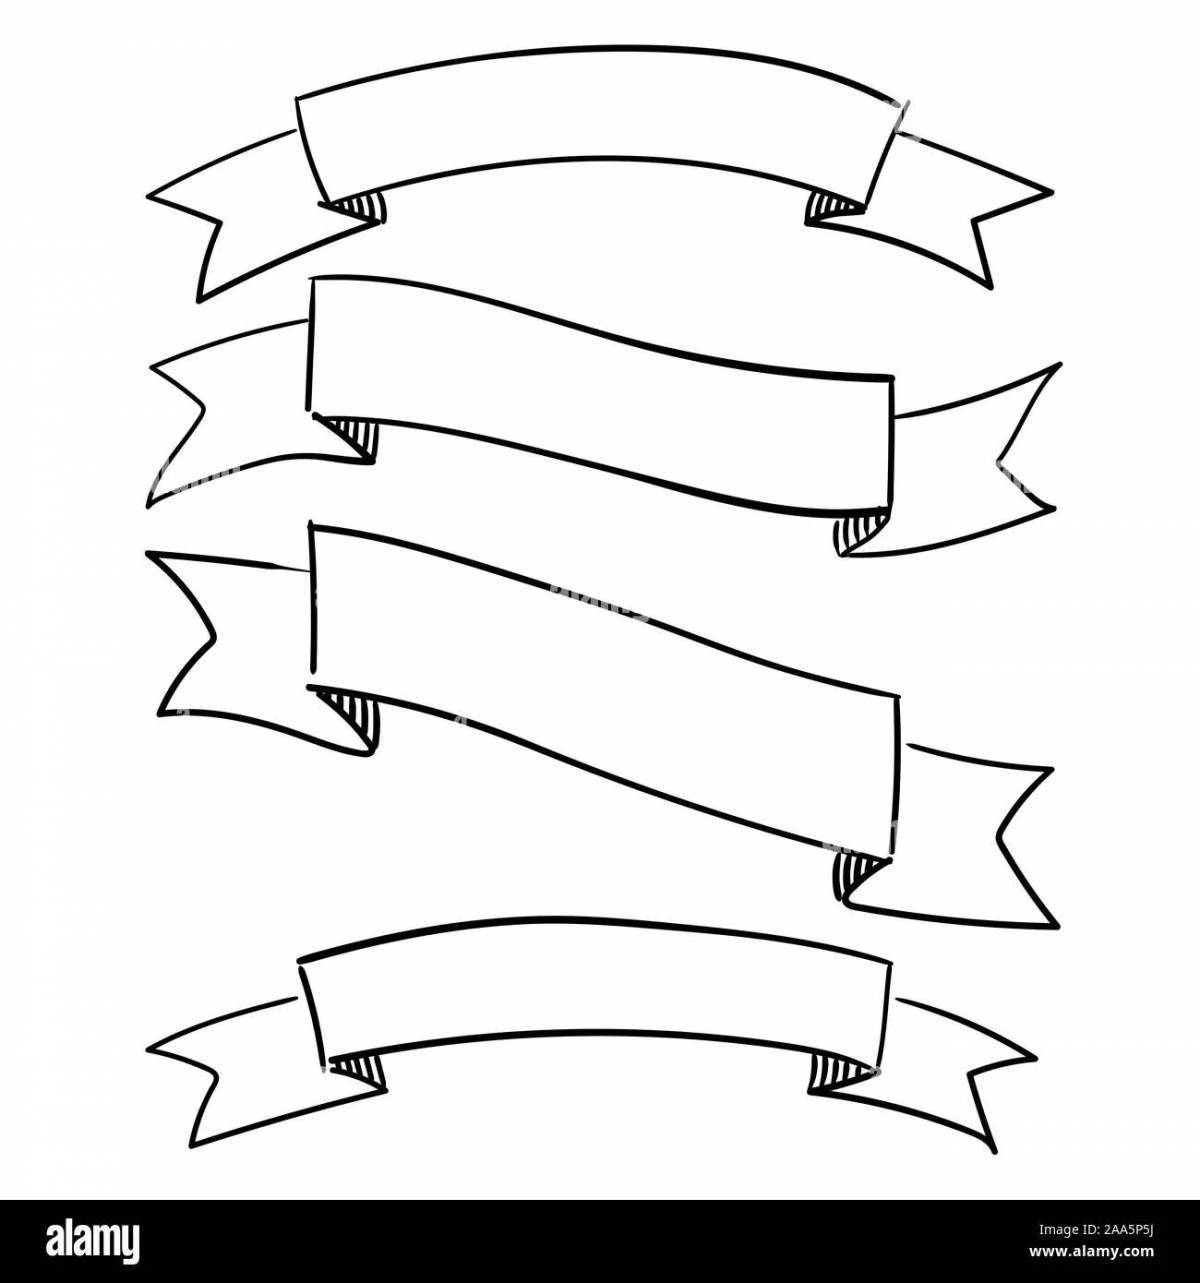 Coloring pages with decorative ribbons for children